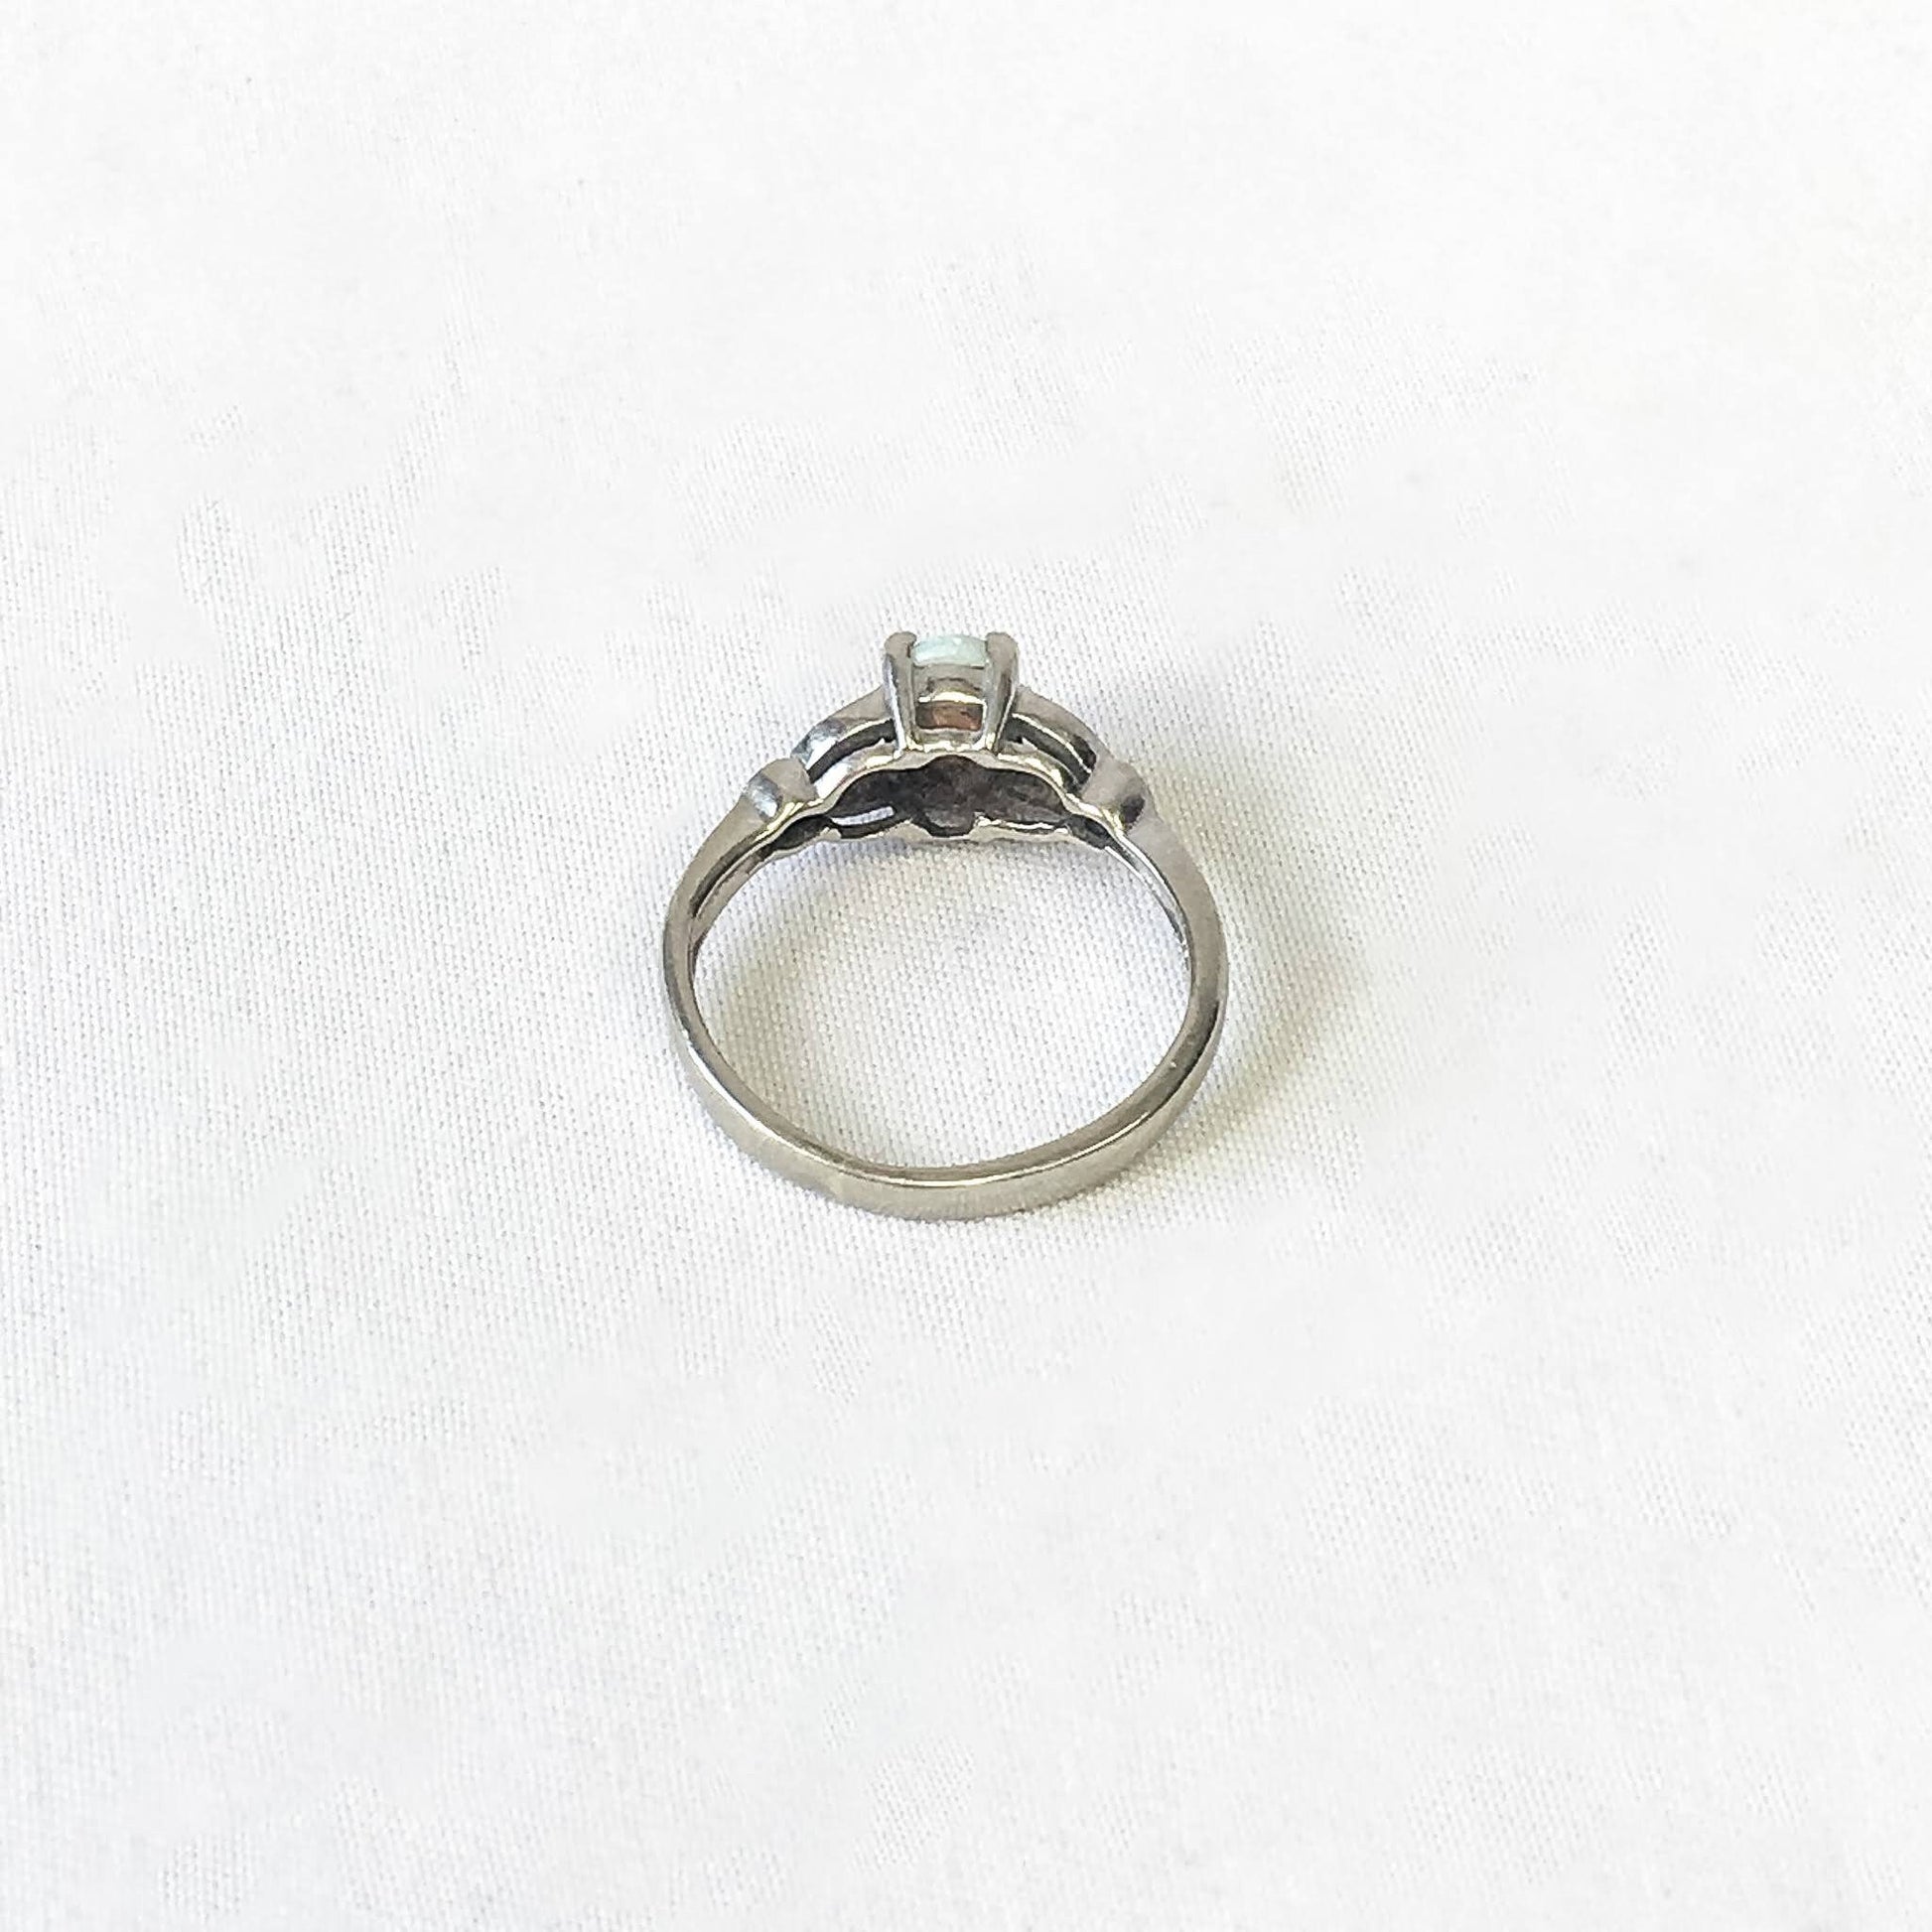 Vintage 10k White Gold Ring with Opal and Diamond Accent, Size 5